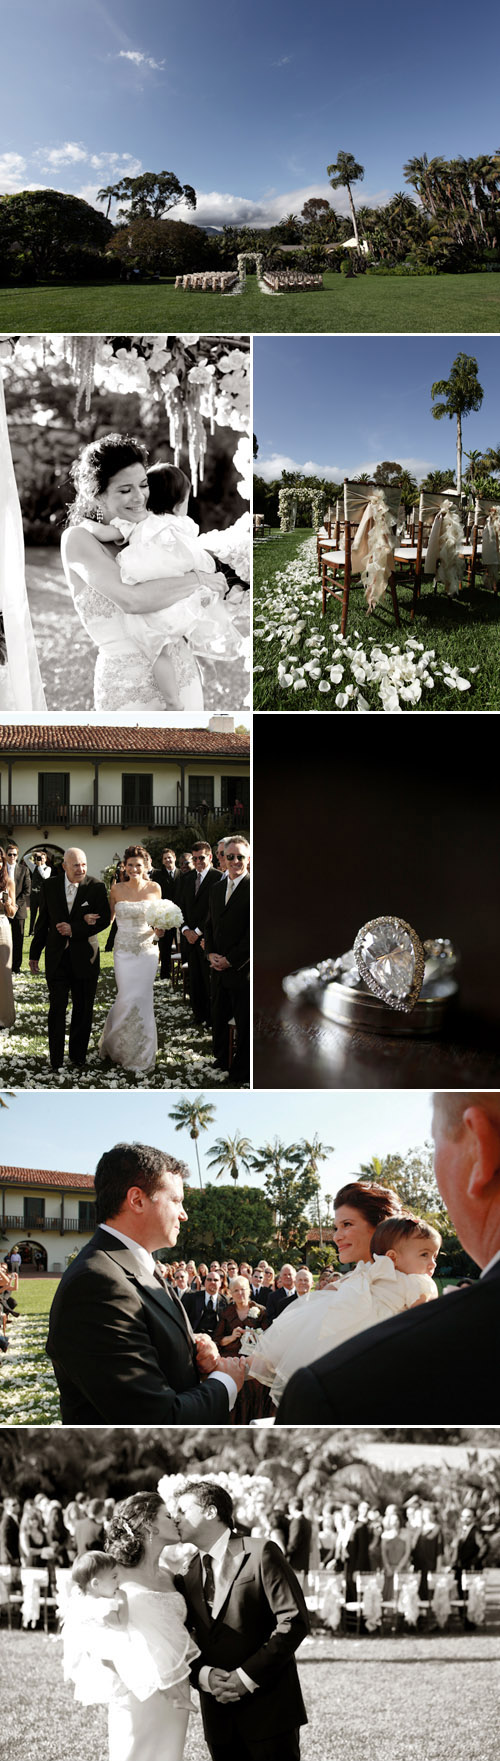 Stylish Santa Barbara real wedding at The Four Seasons Biltmore - Angelique and Michael Deluca - The Social Network movie producer - images by Joan Allen Weddings